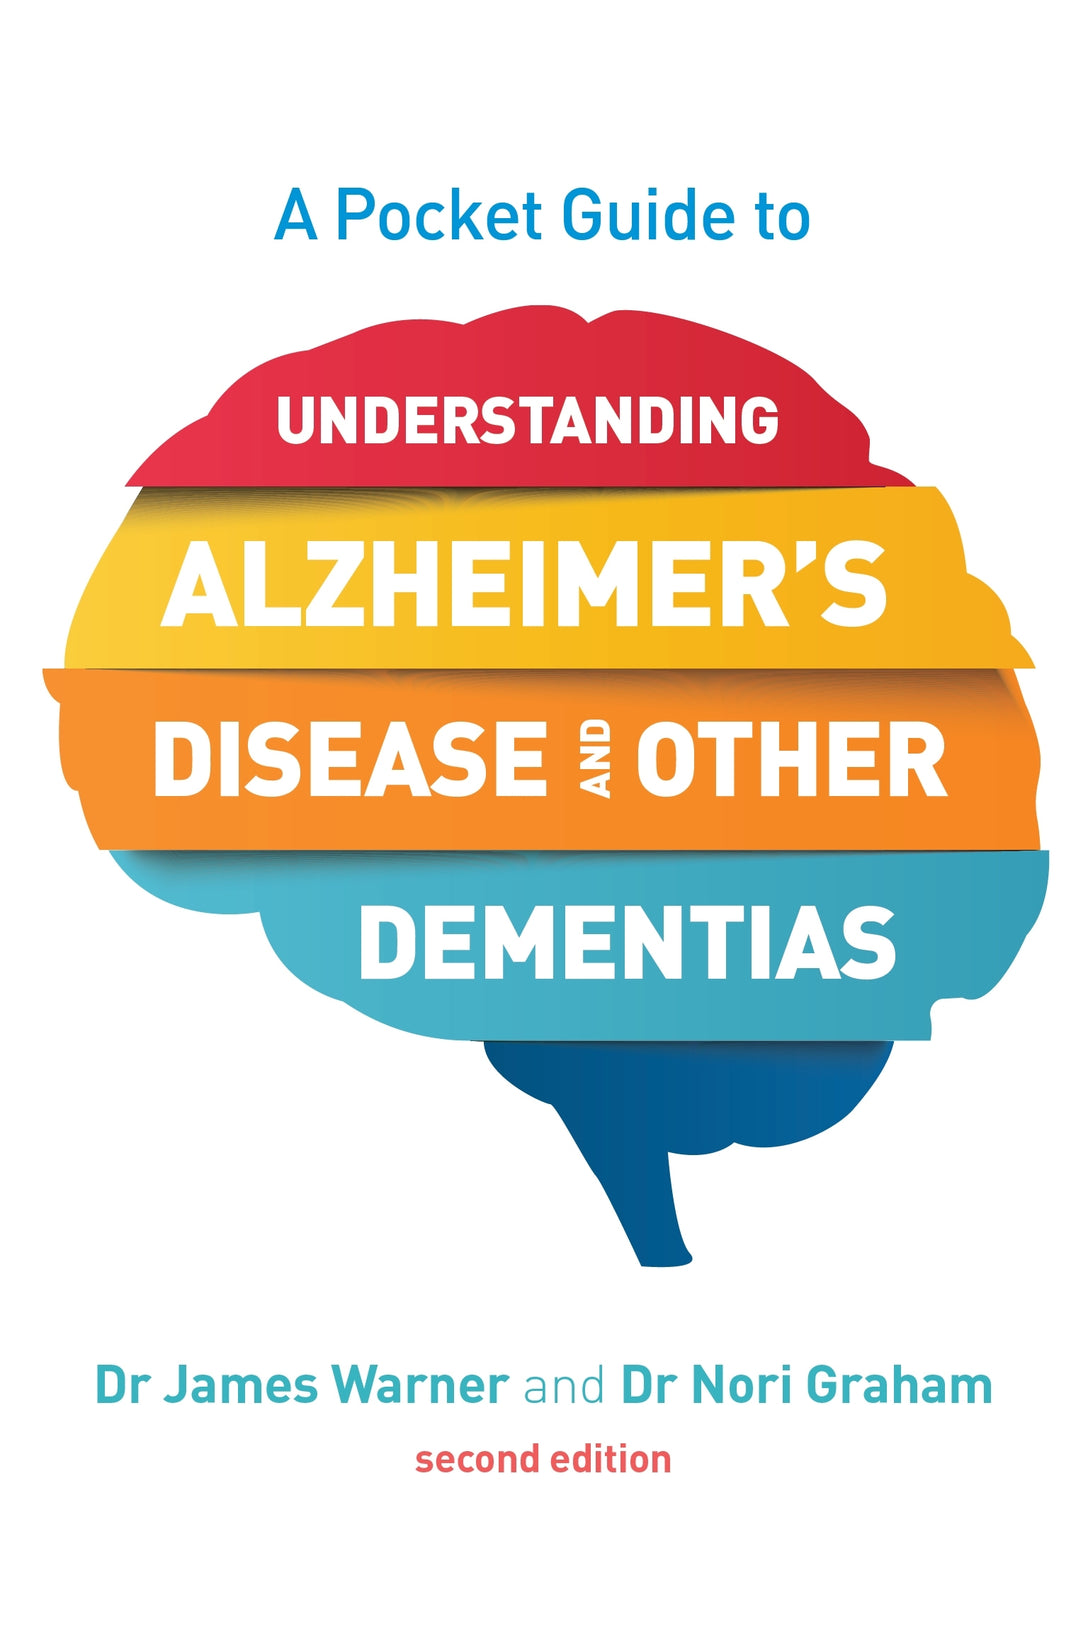 A Pocket Guide to Understanding Alzheimer's Disease and Other Dementias, Second Edition by Nori Graham, James Warner